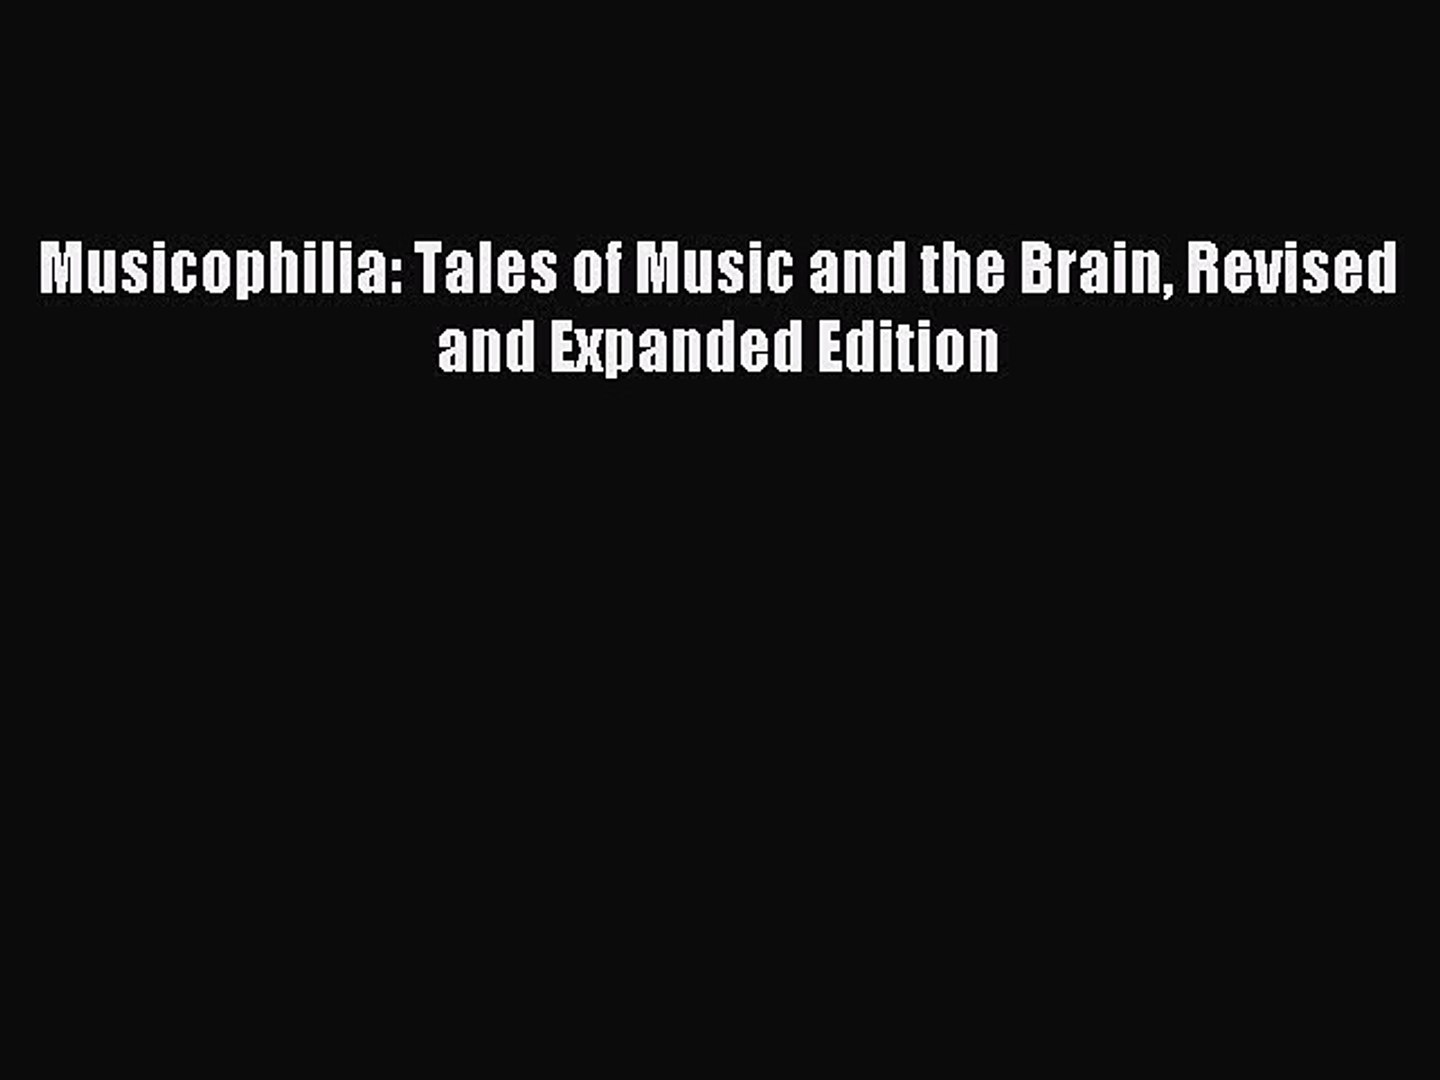 Download Books Musicophilia tales of music and the brain No Survey